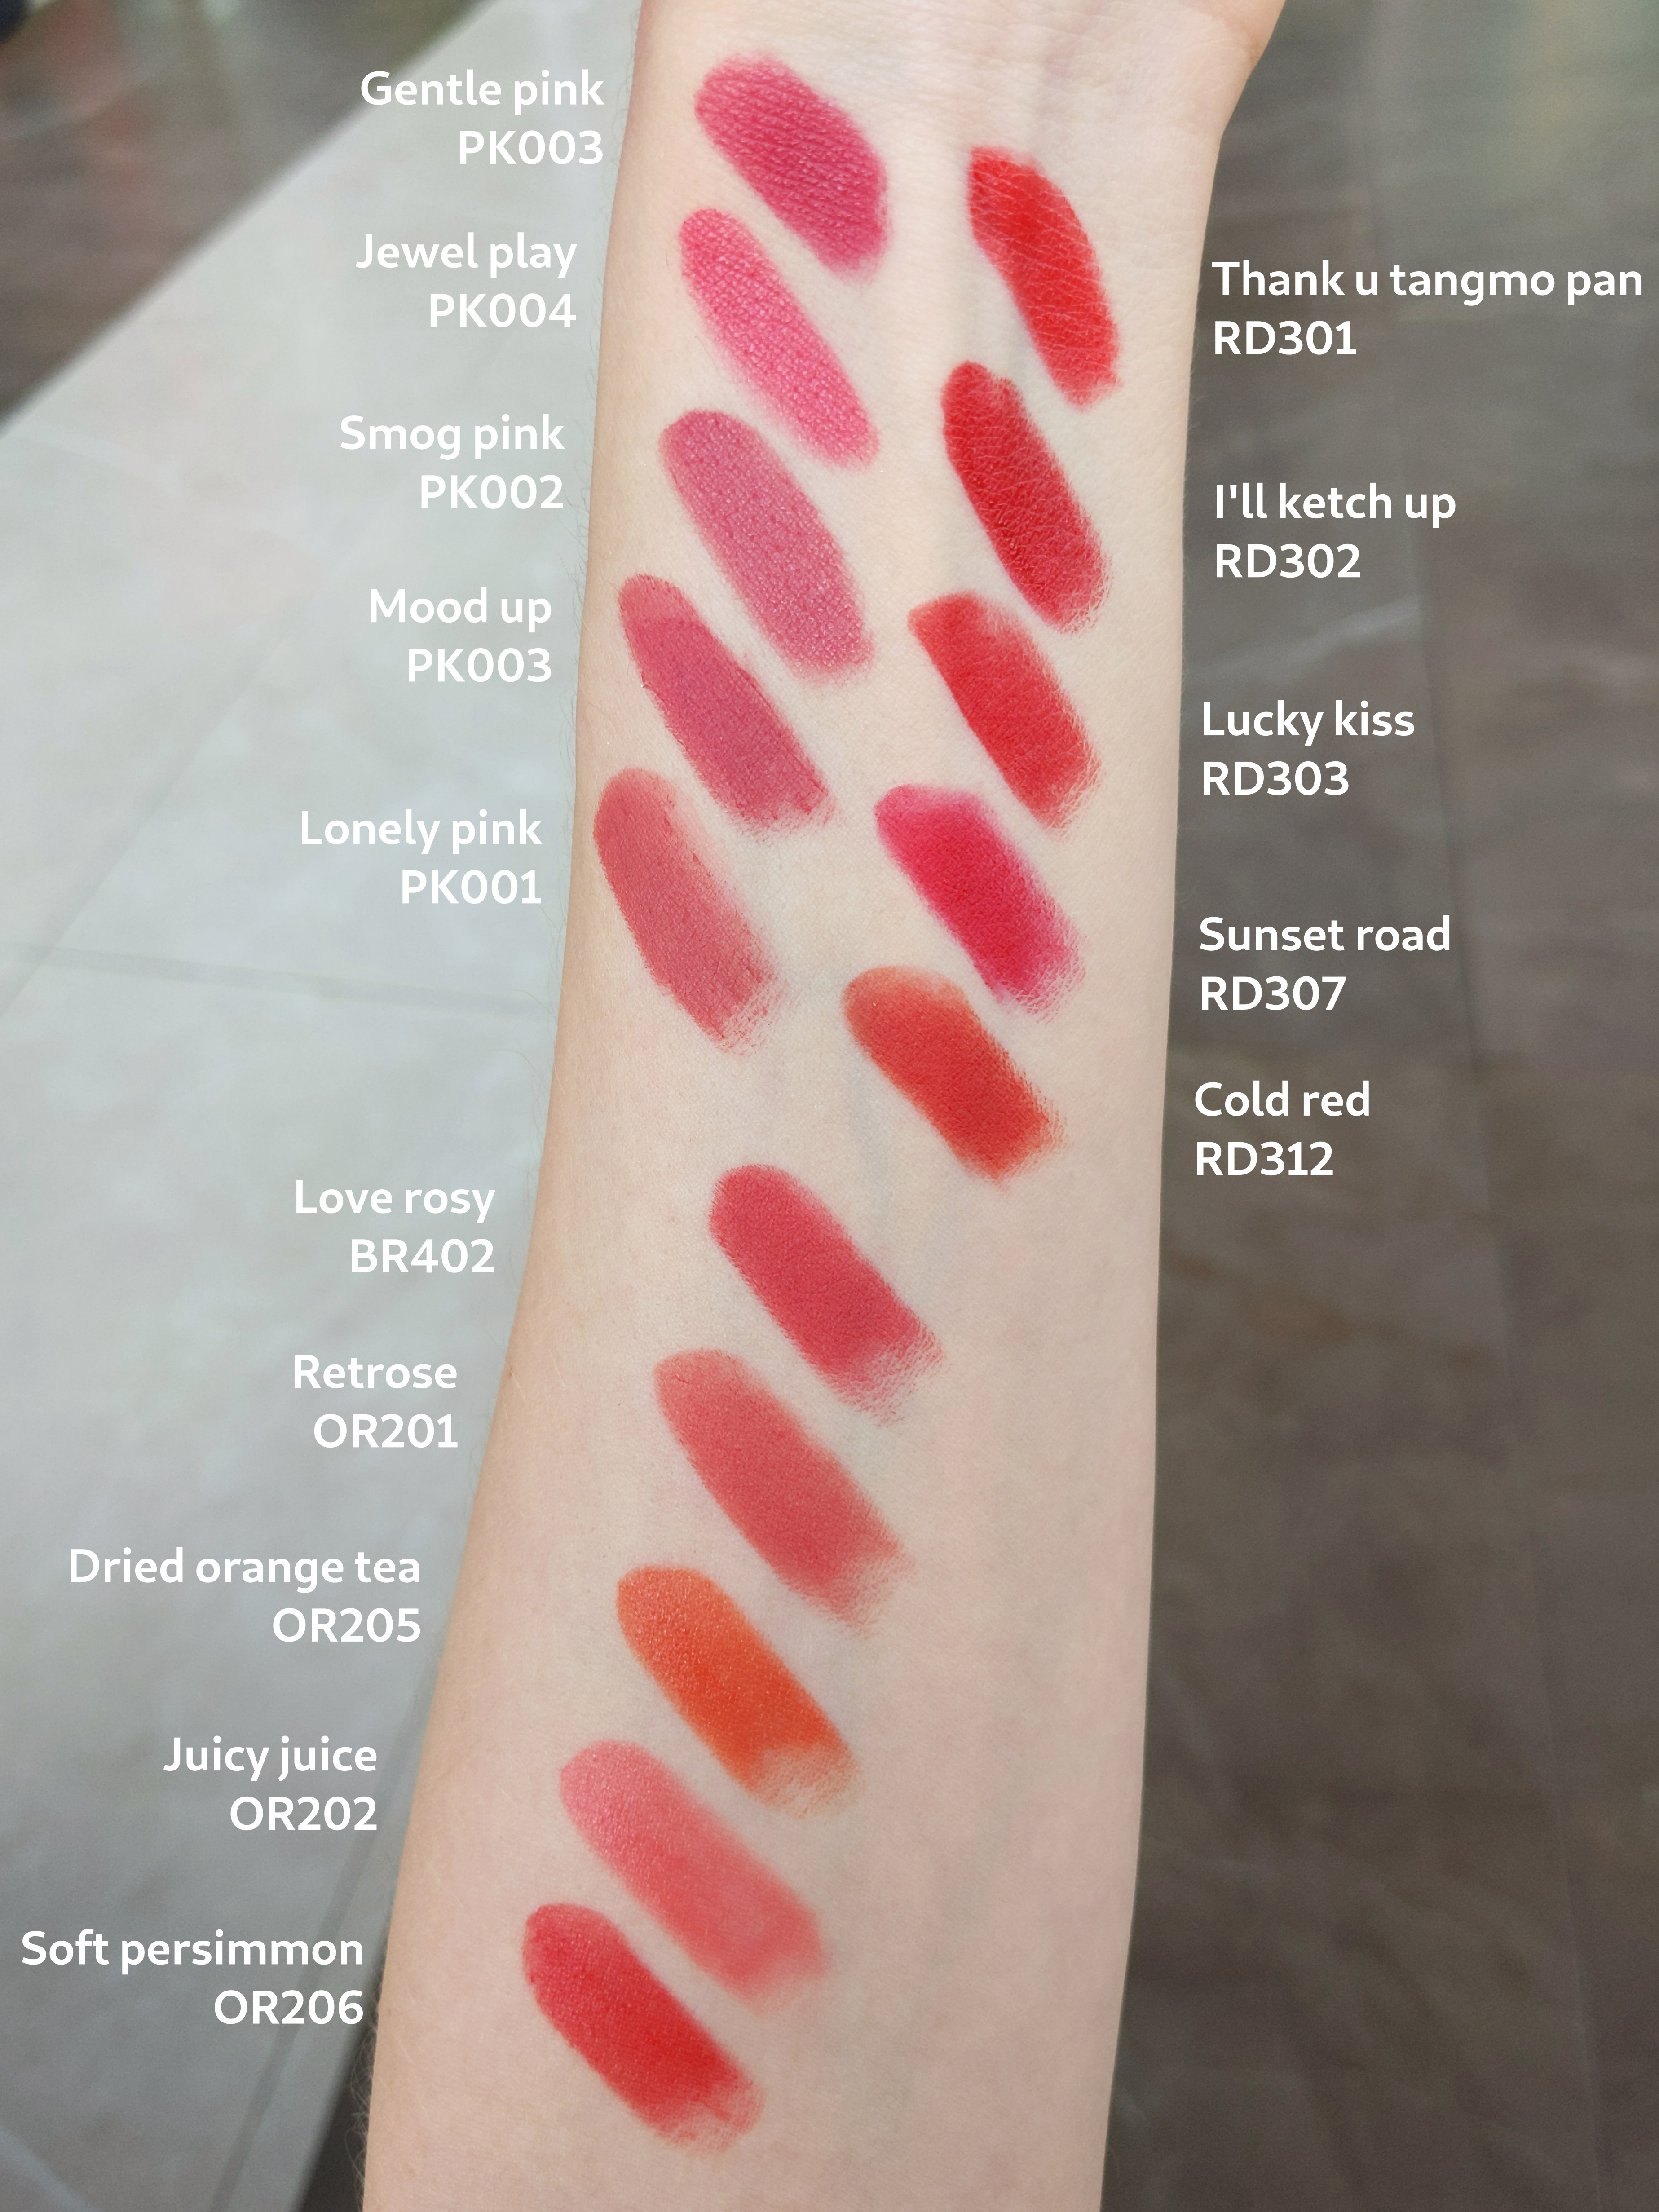 Etude House Better Lips-Talk best lipstick shades for fair skin in pink, red, brown and orange.